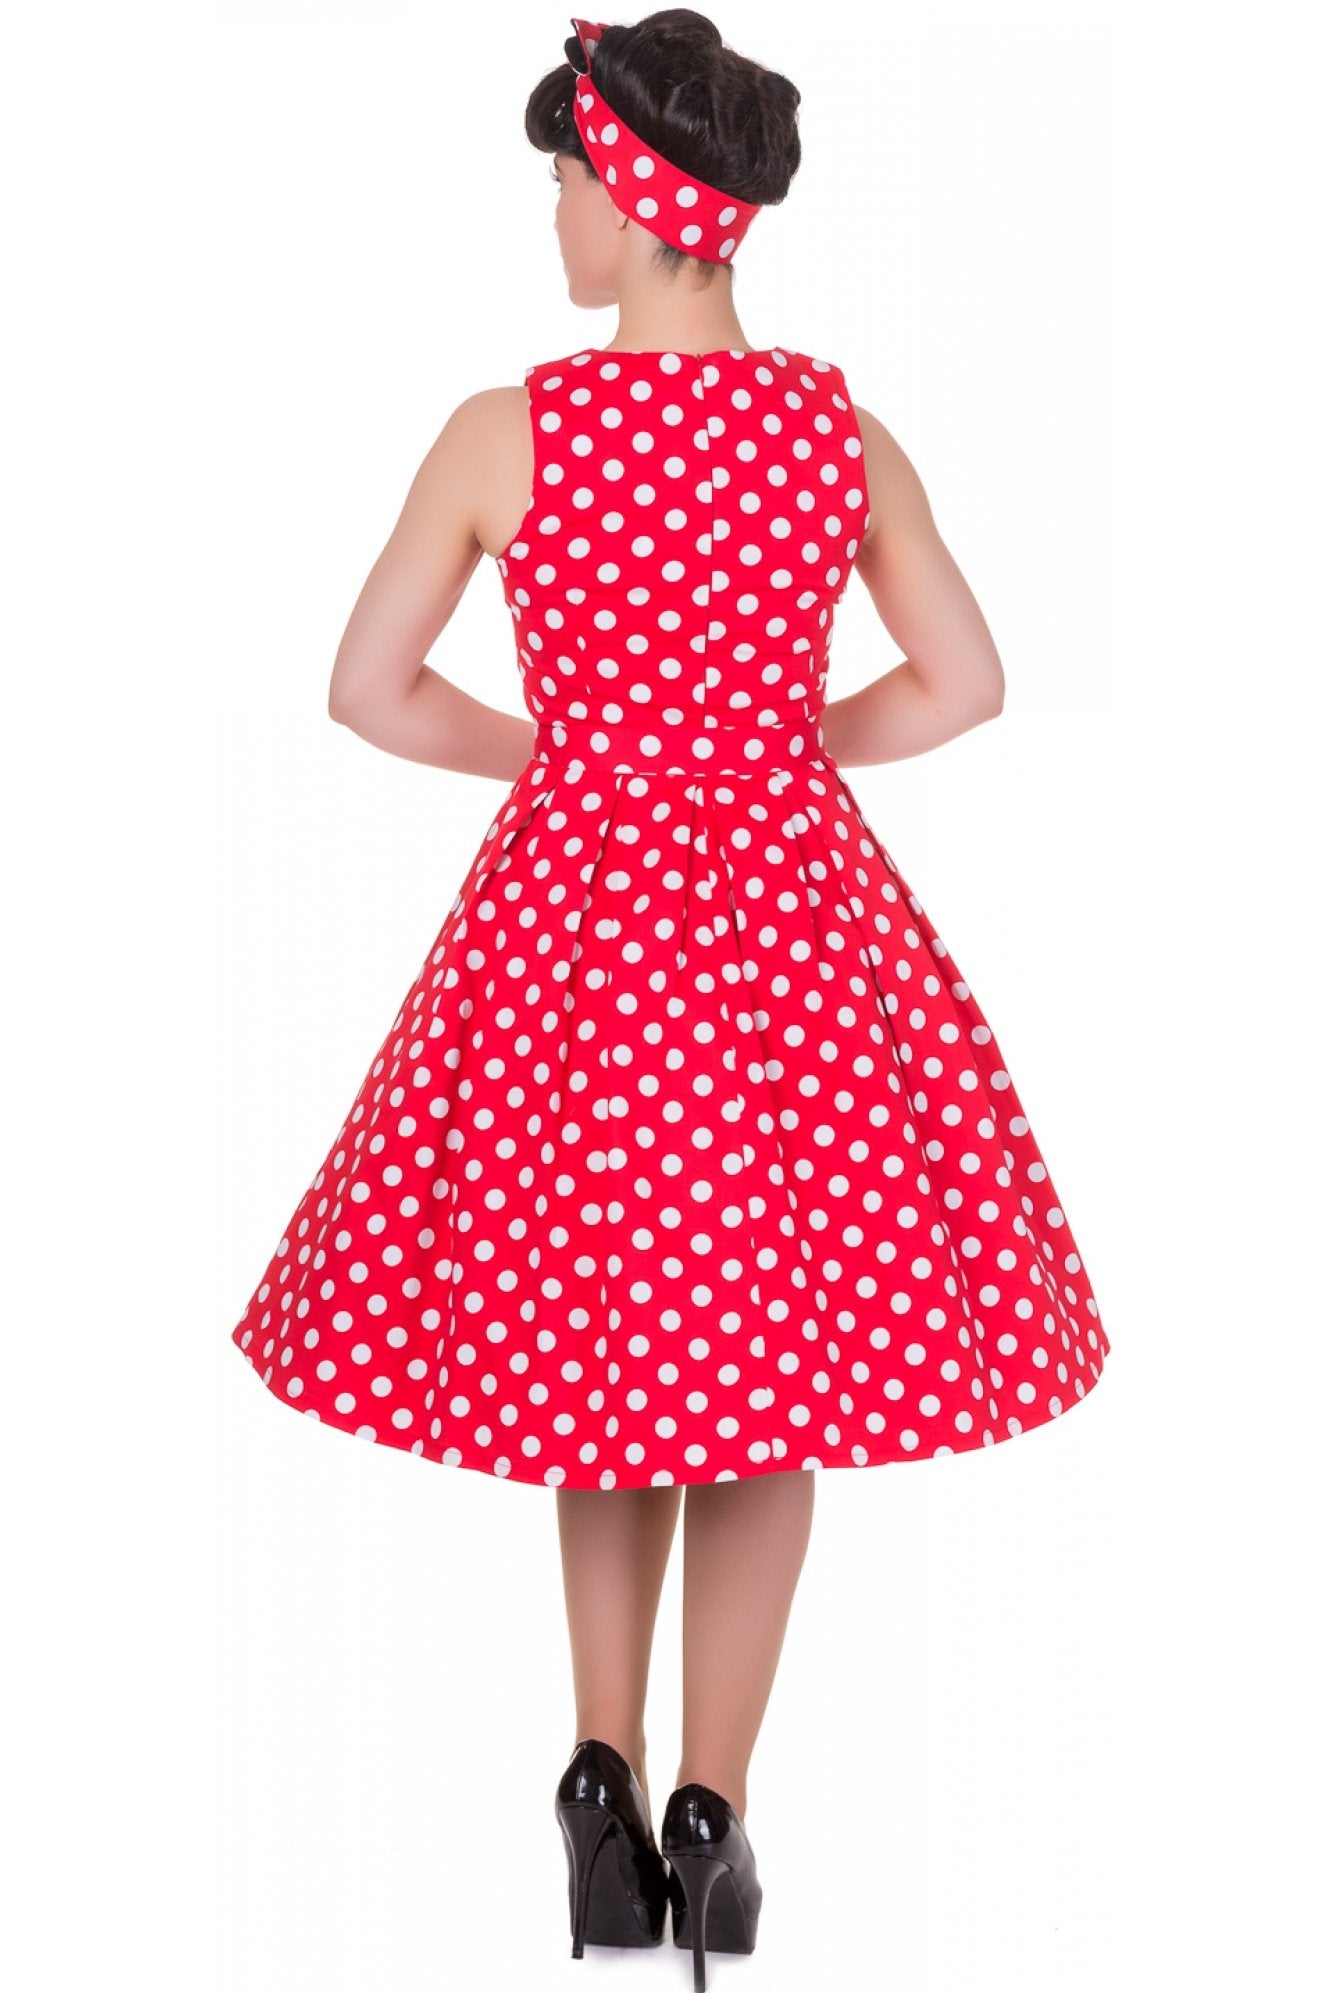 Model wearing our sleeveless Annie dress, in red, with white spots, back view